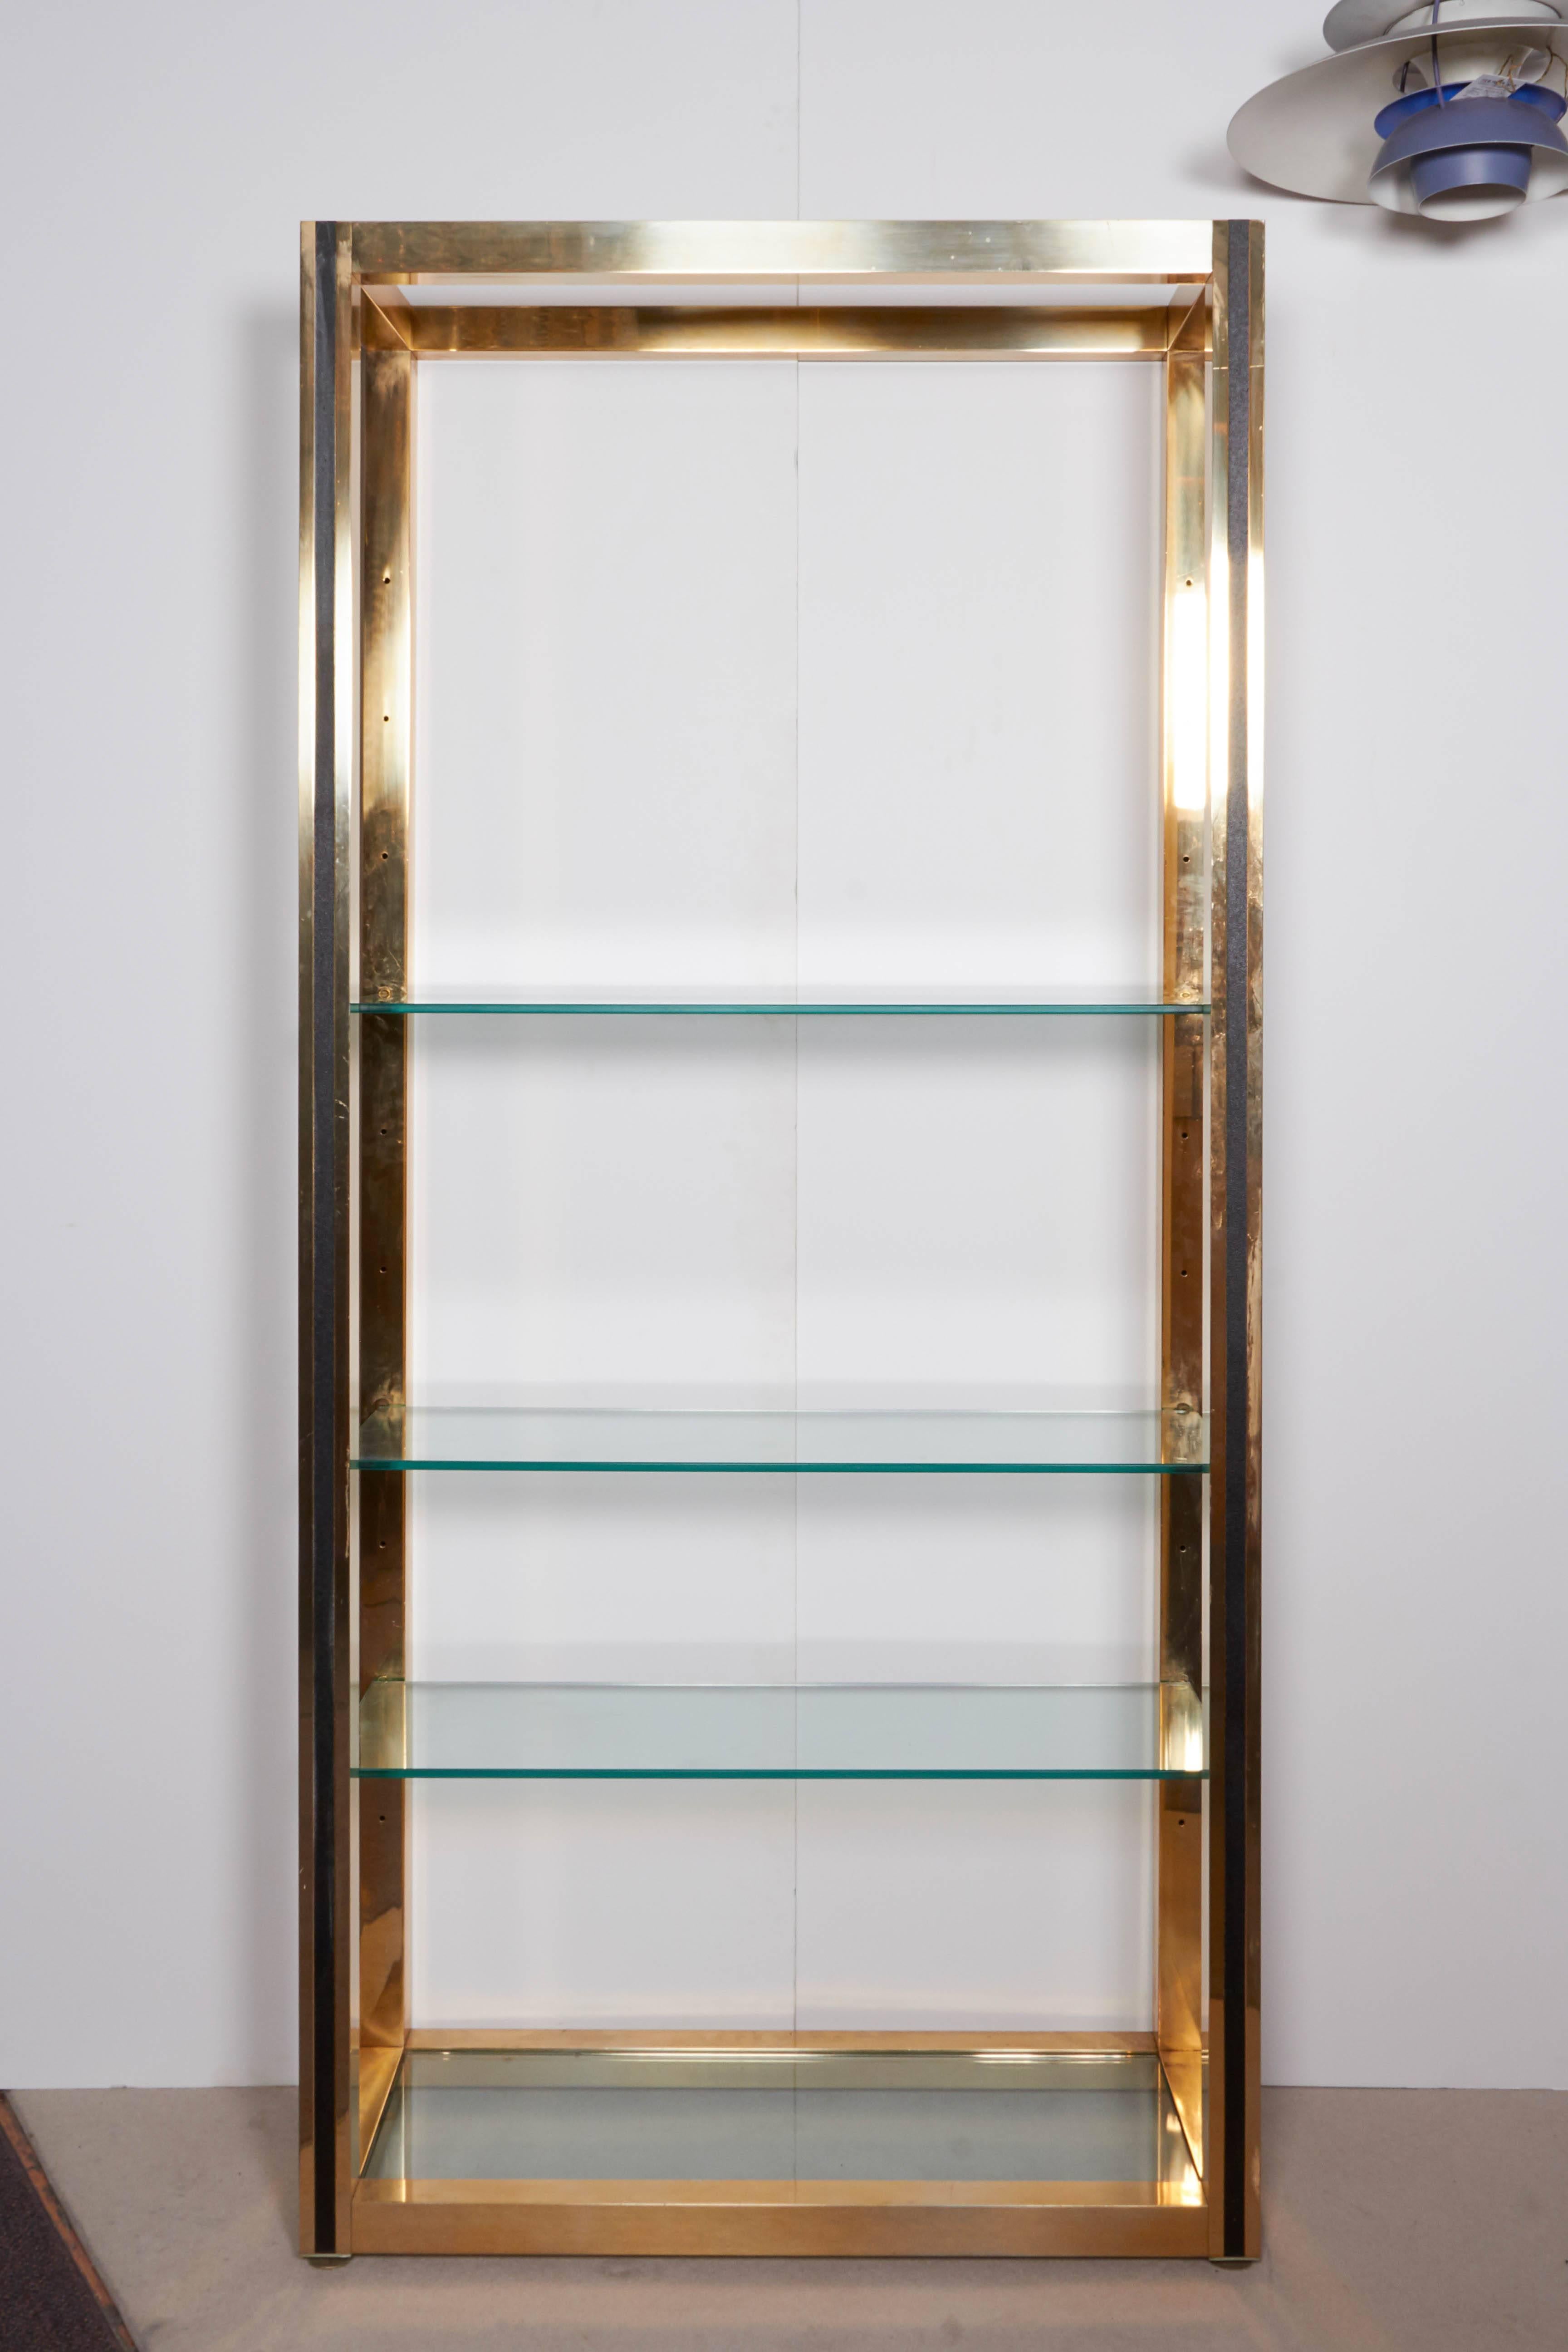 A linear Mid-Century Modern étagère produced circa 1970s and designed in the style of Milo Baughman, in brass and faux leather detailing with glass shelves. Very good vintage condition with age appropriate wear; glass requires replacement.

F34
11079